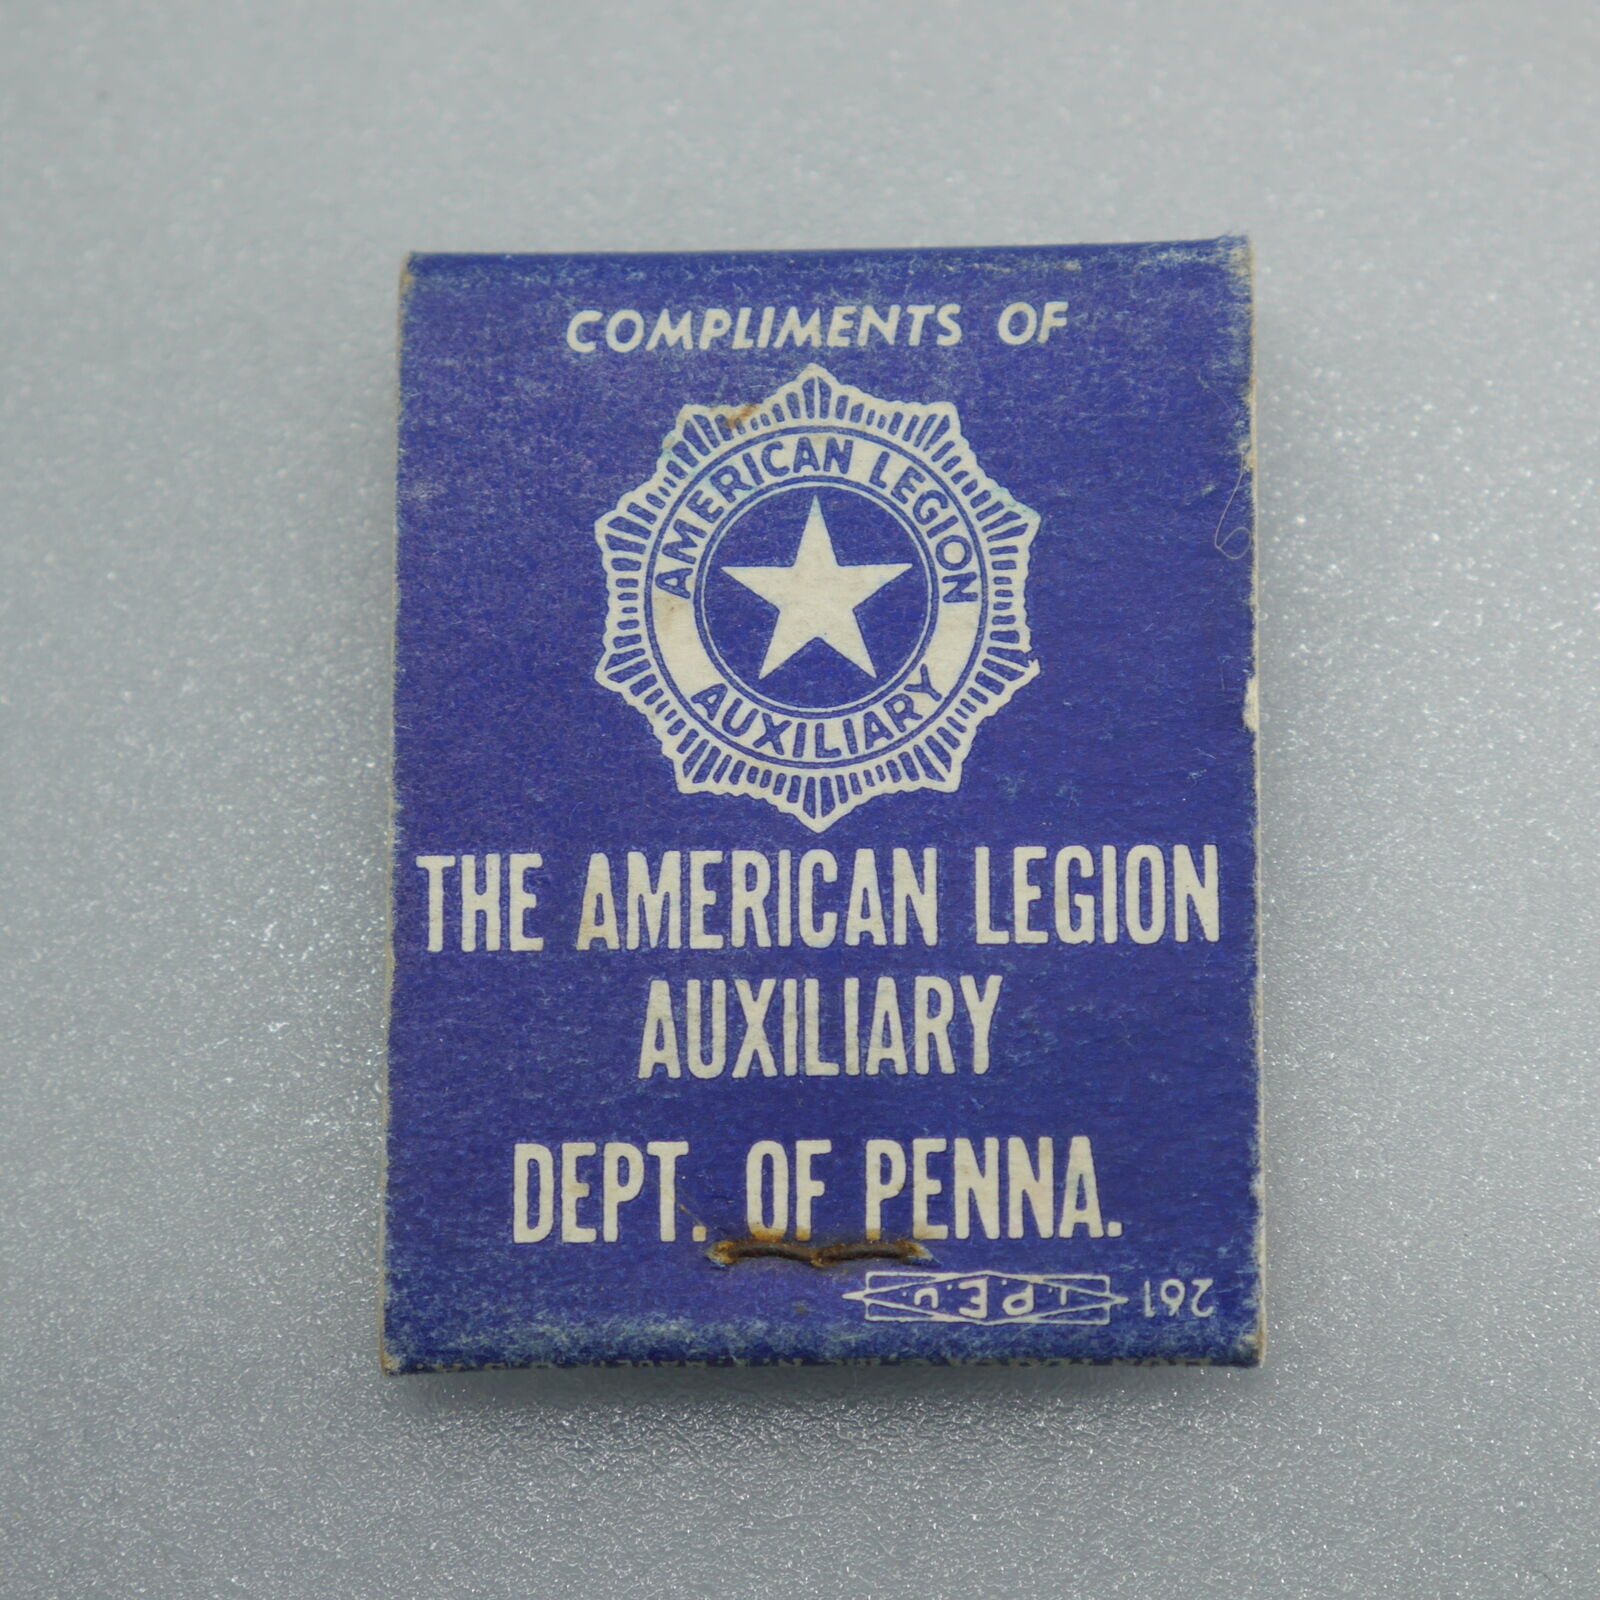 American Legion Auxiliary Dept. of Penna Matchbook Vintage Cover Unstruck